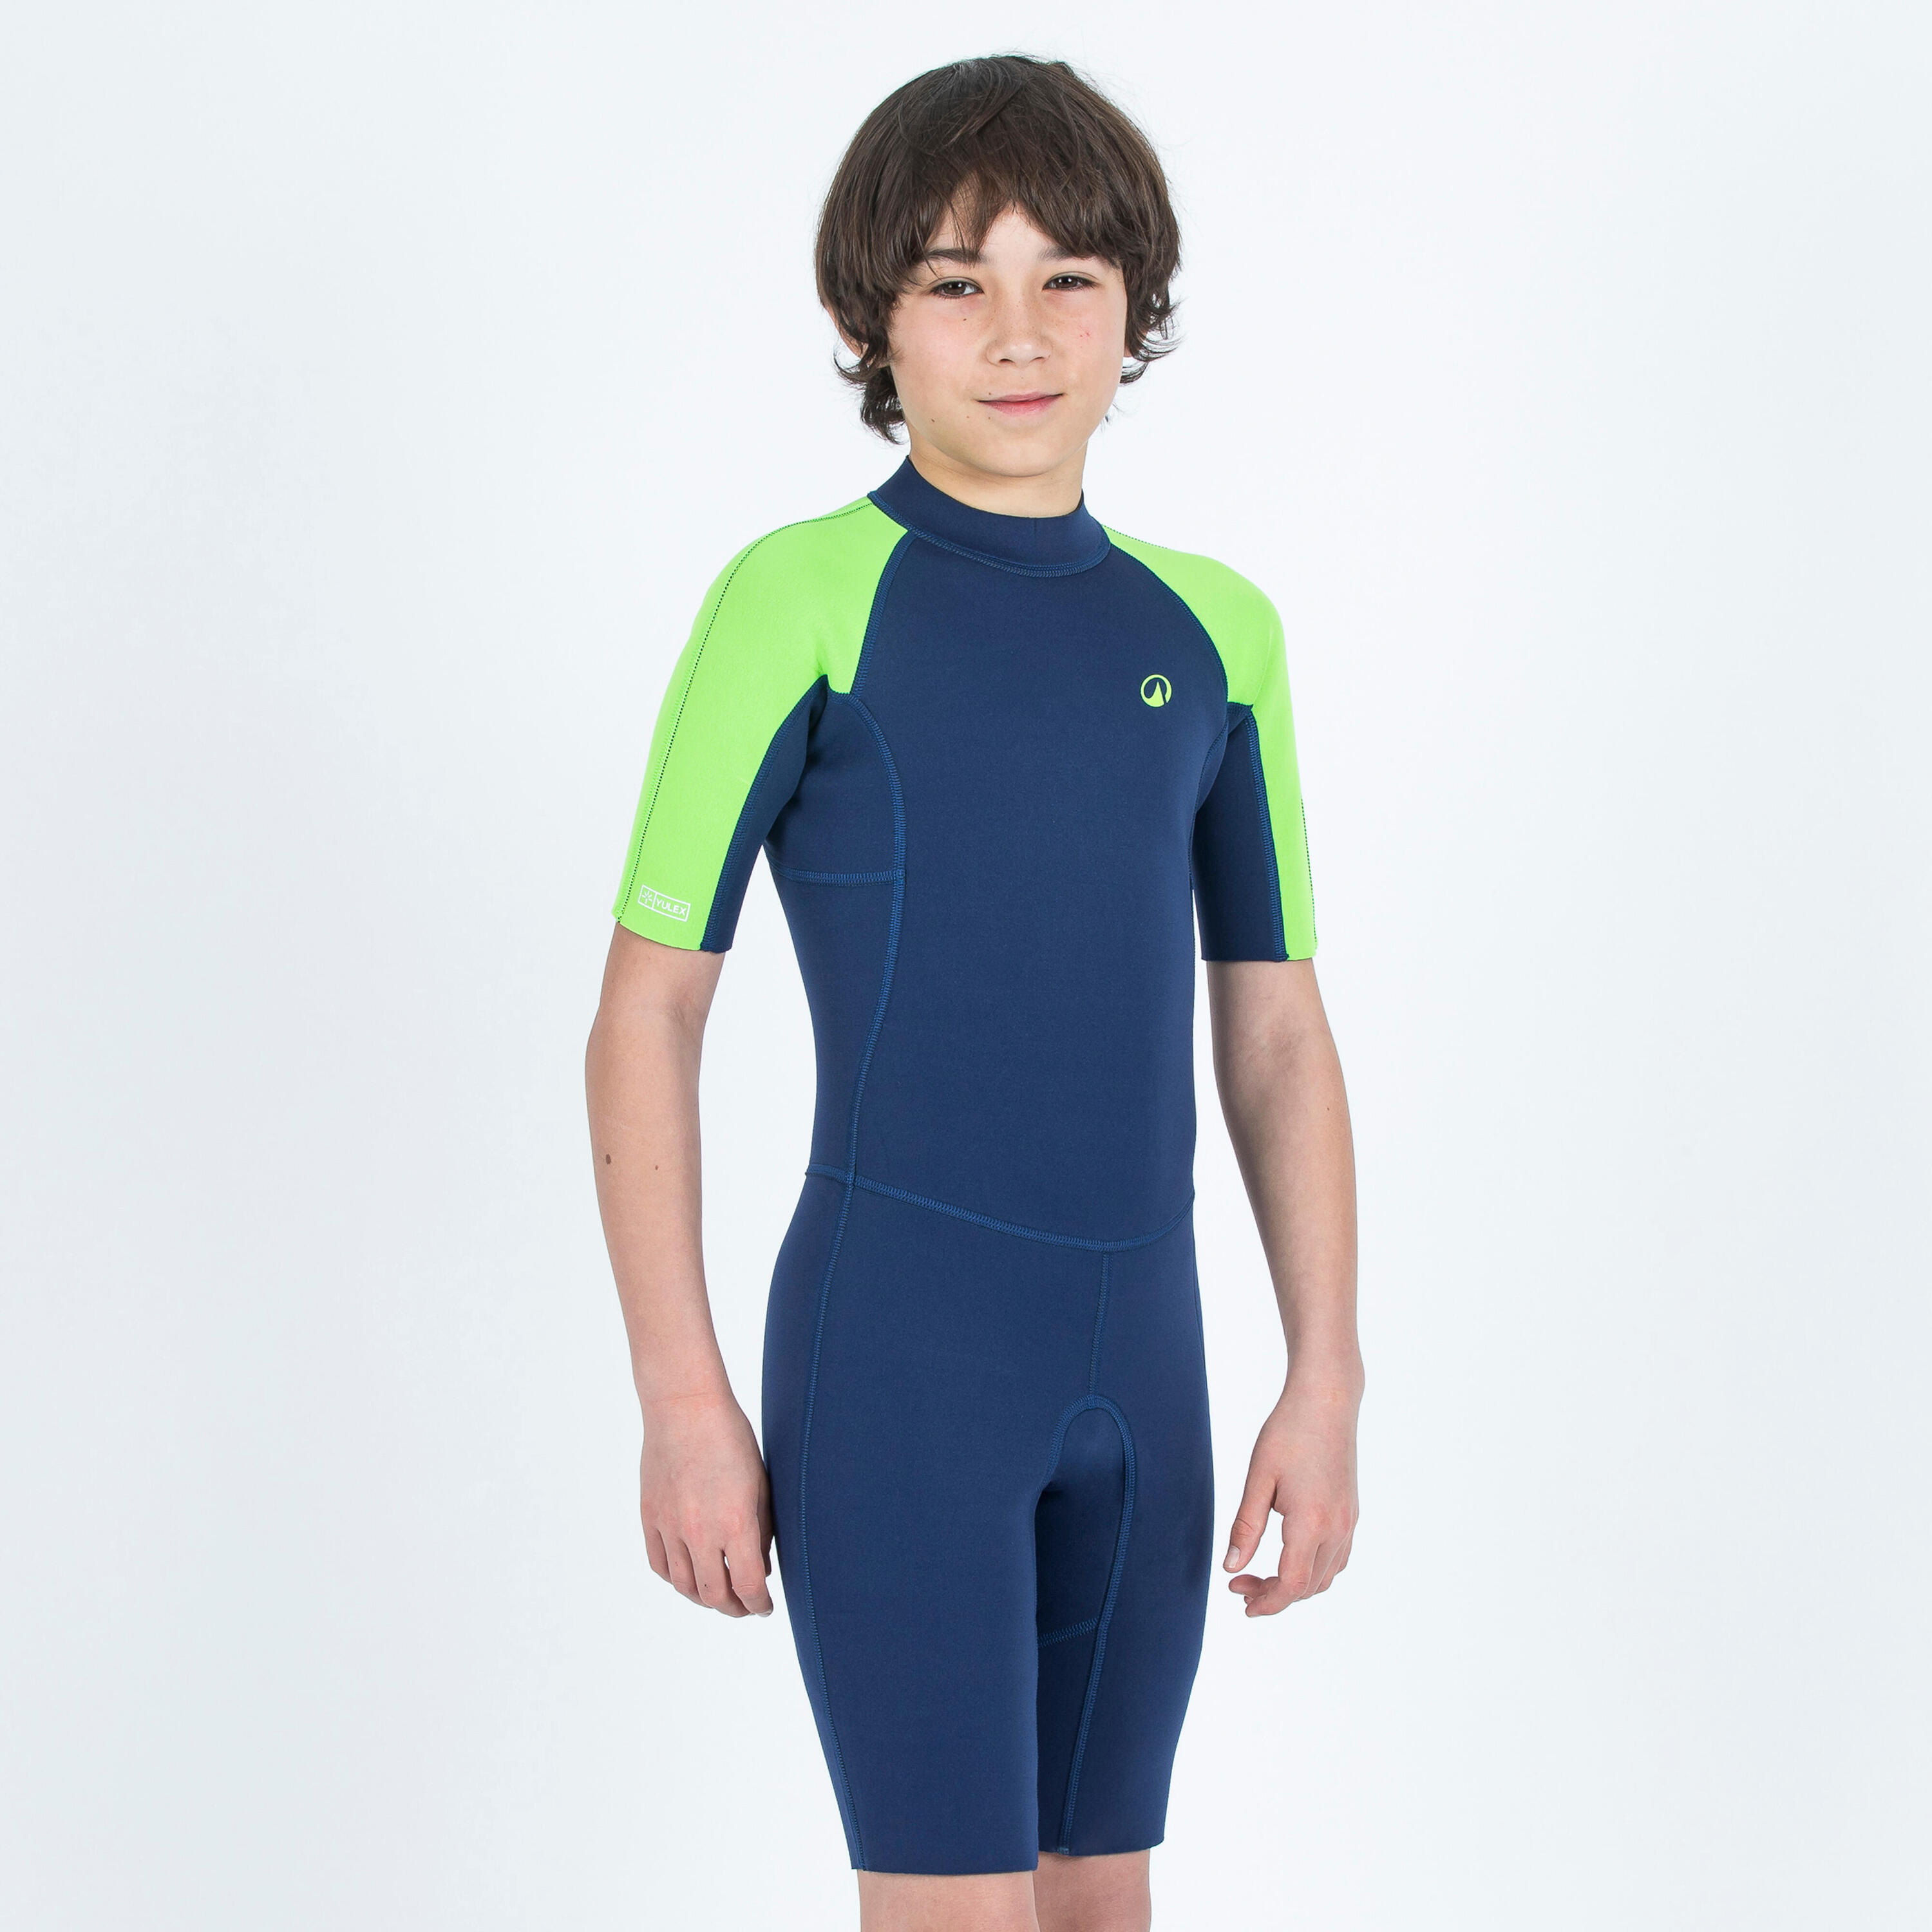 OLAIAN Kids' surfing shorty suit 1.5 mm - YULEX100 ® blue green